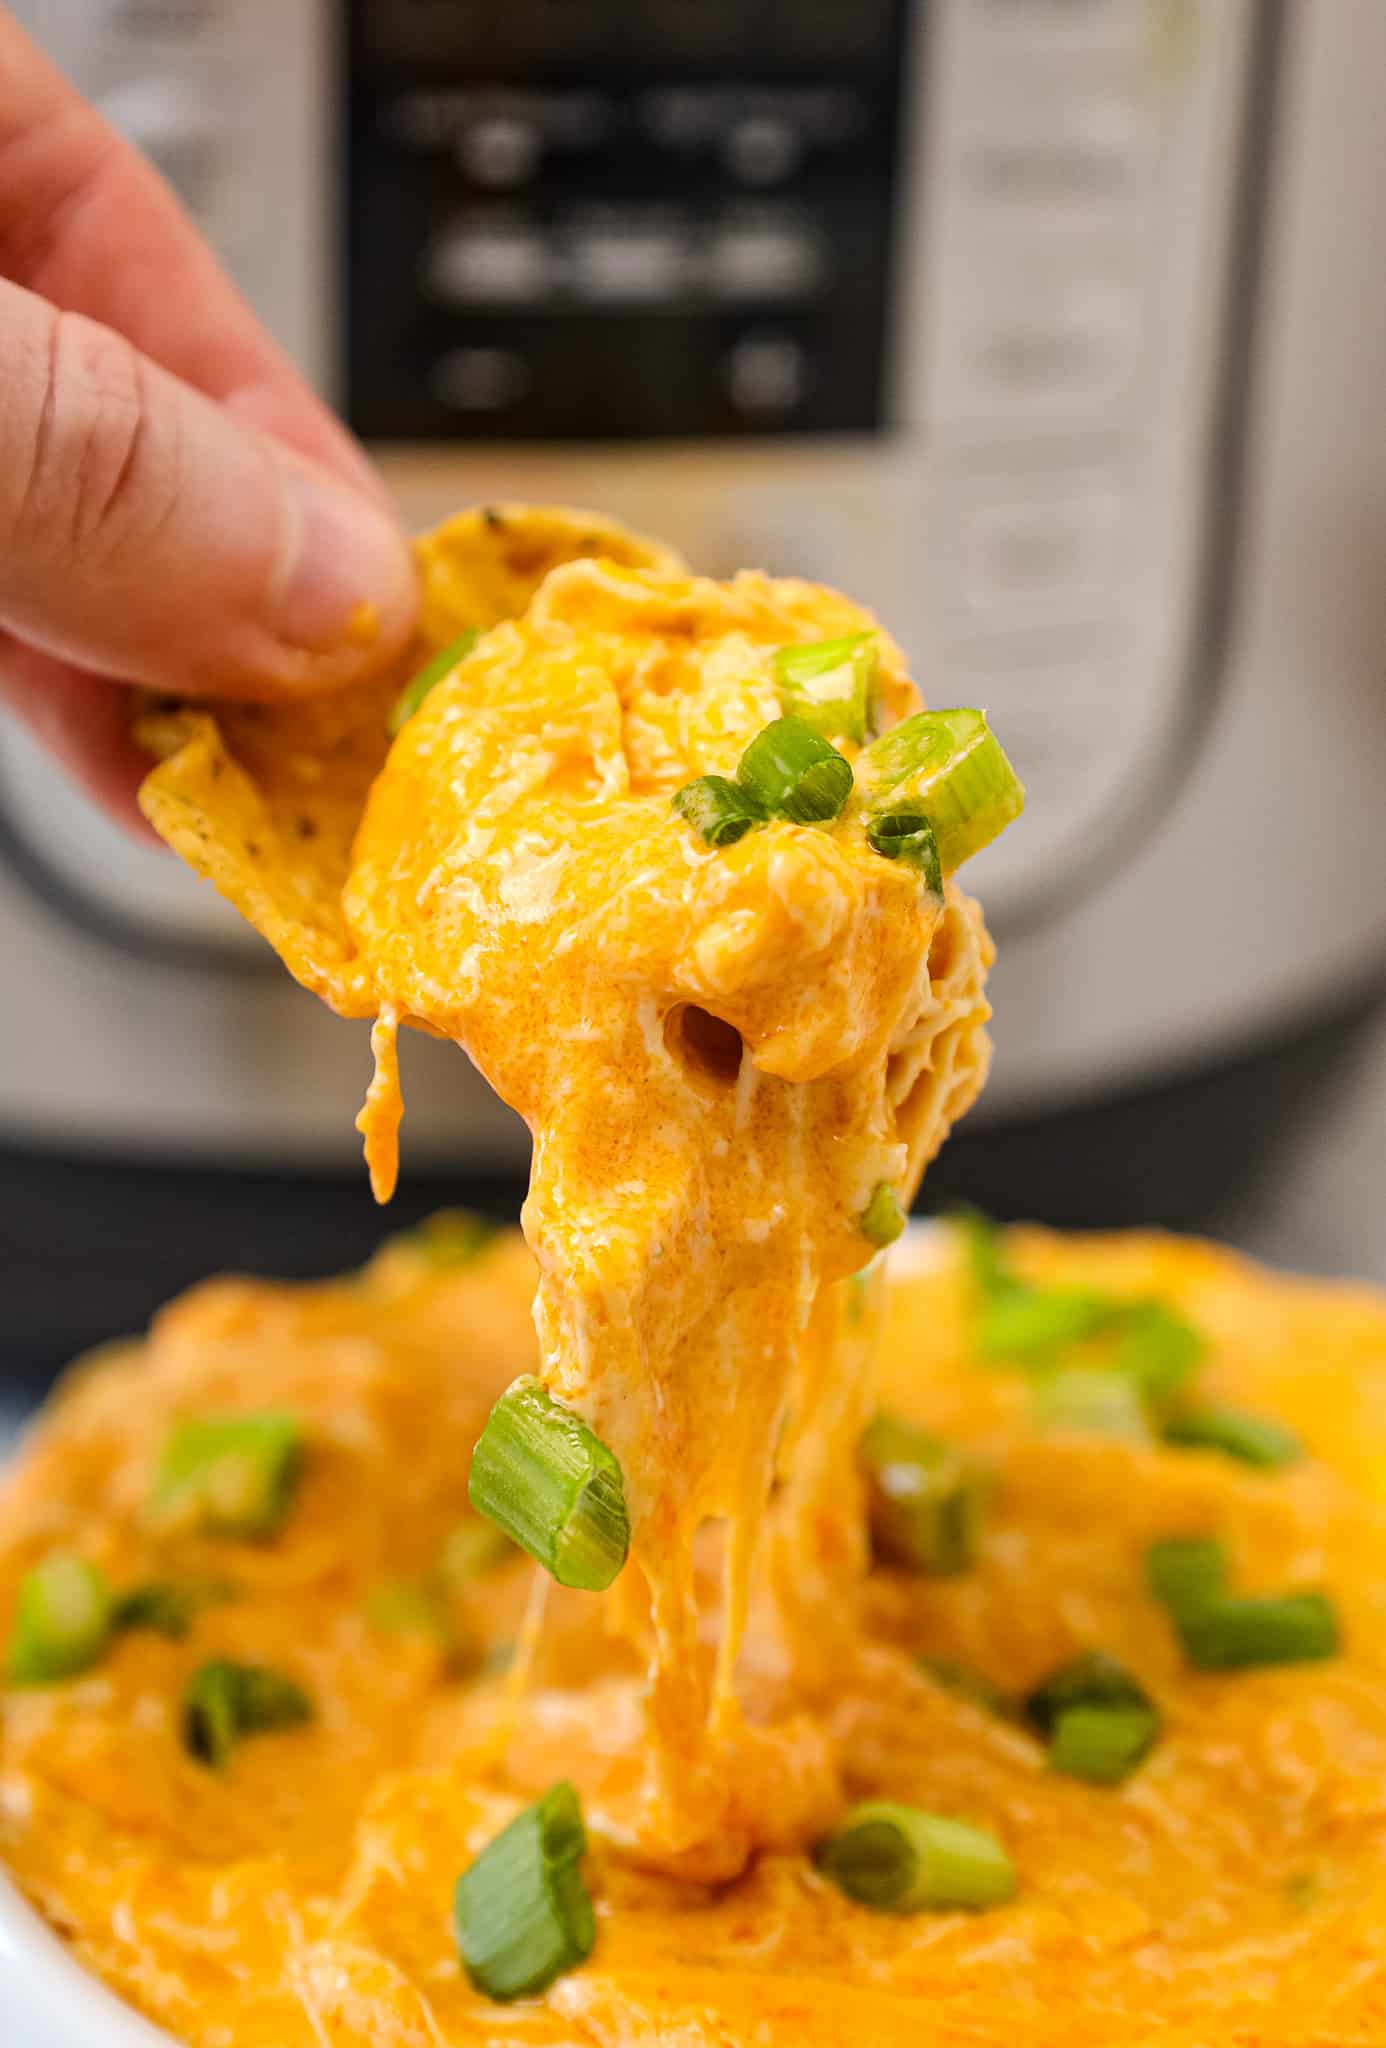 Instant Pot Buffalo Chicken Dip is a delicious pressure cooker party dip recipe loaded with shredded chicken, Buffalo sauce, ranch dressing, cream cheese and a blend of shredded cheeses.